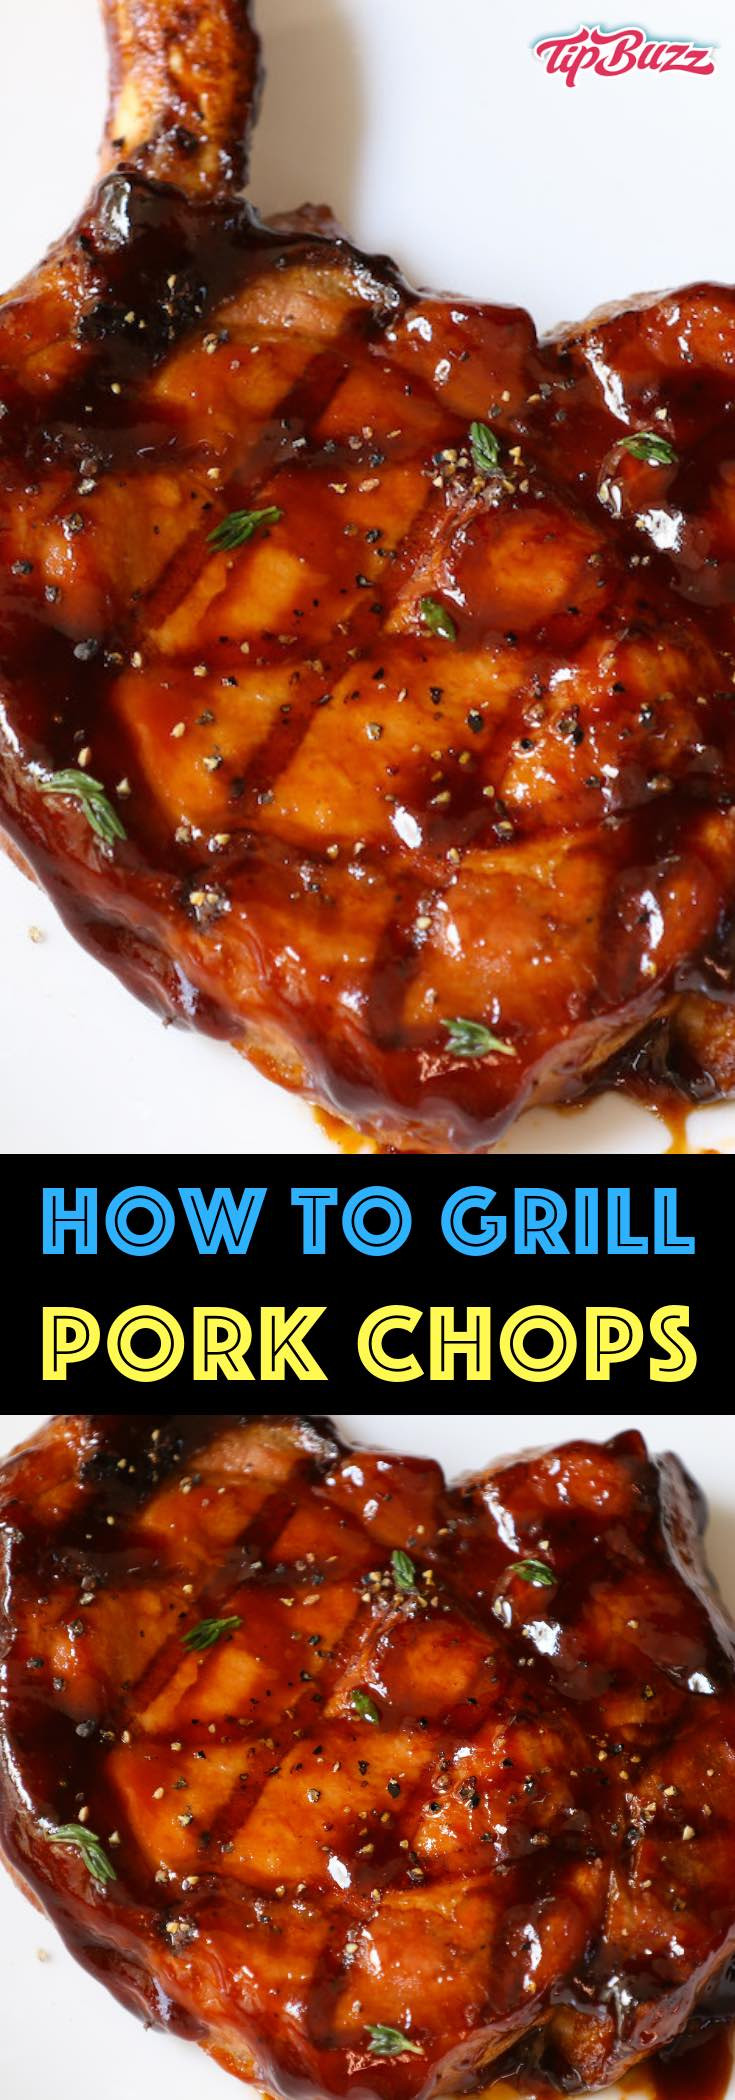 Boneless Pork Chops On The Grill
 How Long to Grill Pork Chops TipBuzz